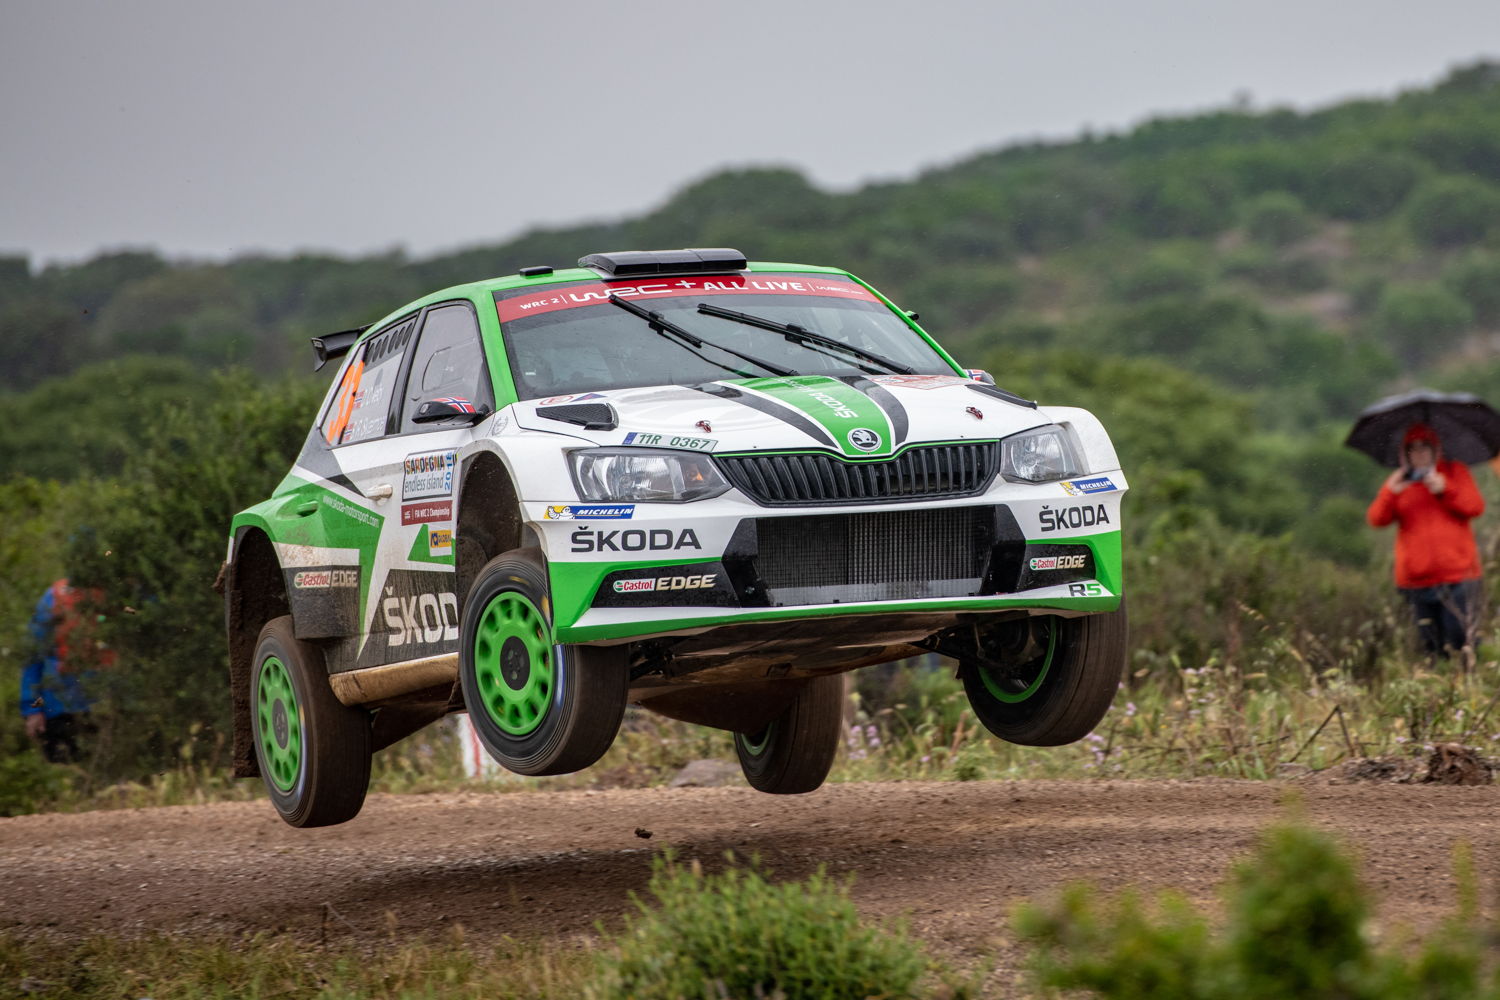 Driving a ŠKODA FABIA R5 Norwegian ŠKODA juniors
Ole Christian Veiby/Stig Rune Skjaermoen (NOR/NOR)
want to reduce the gap to the WRC 2 championship
leaders with a good result in Finland